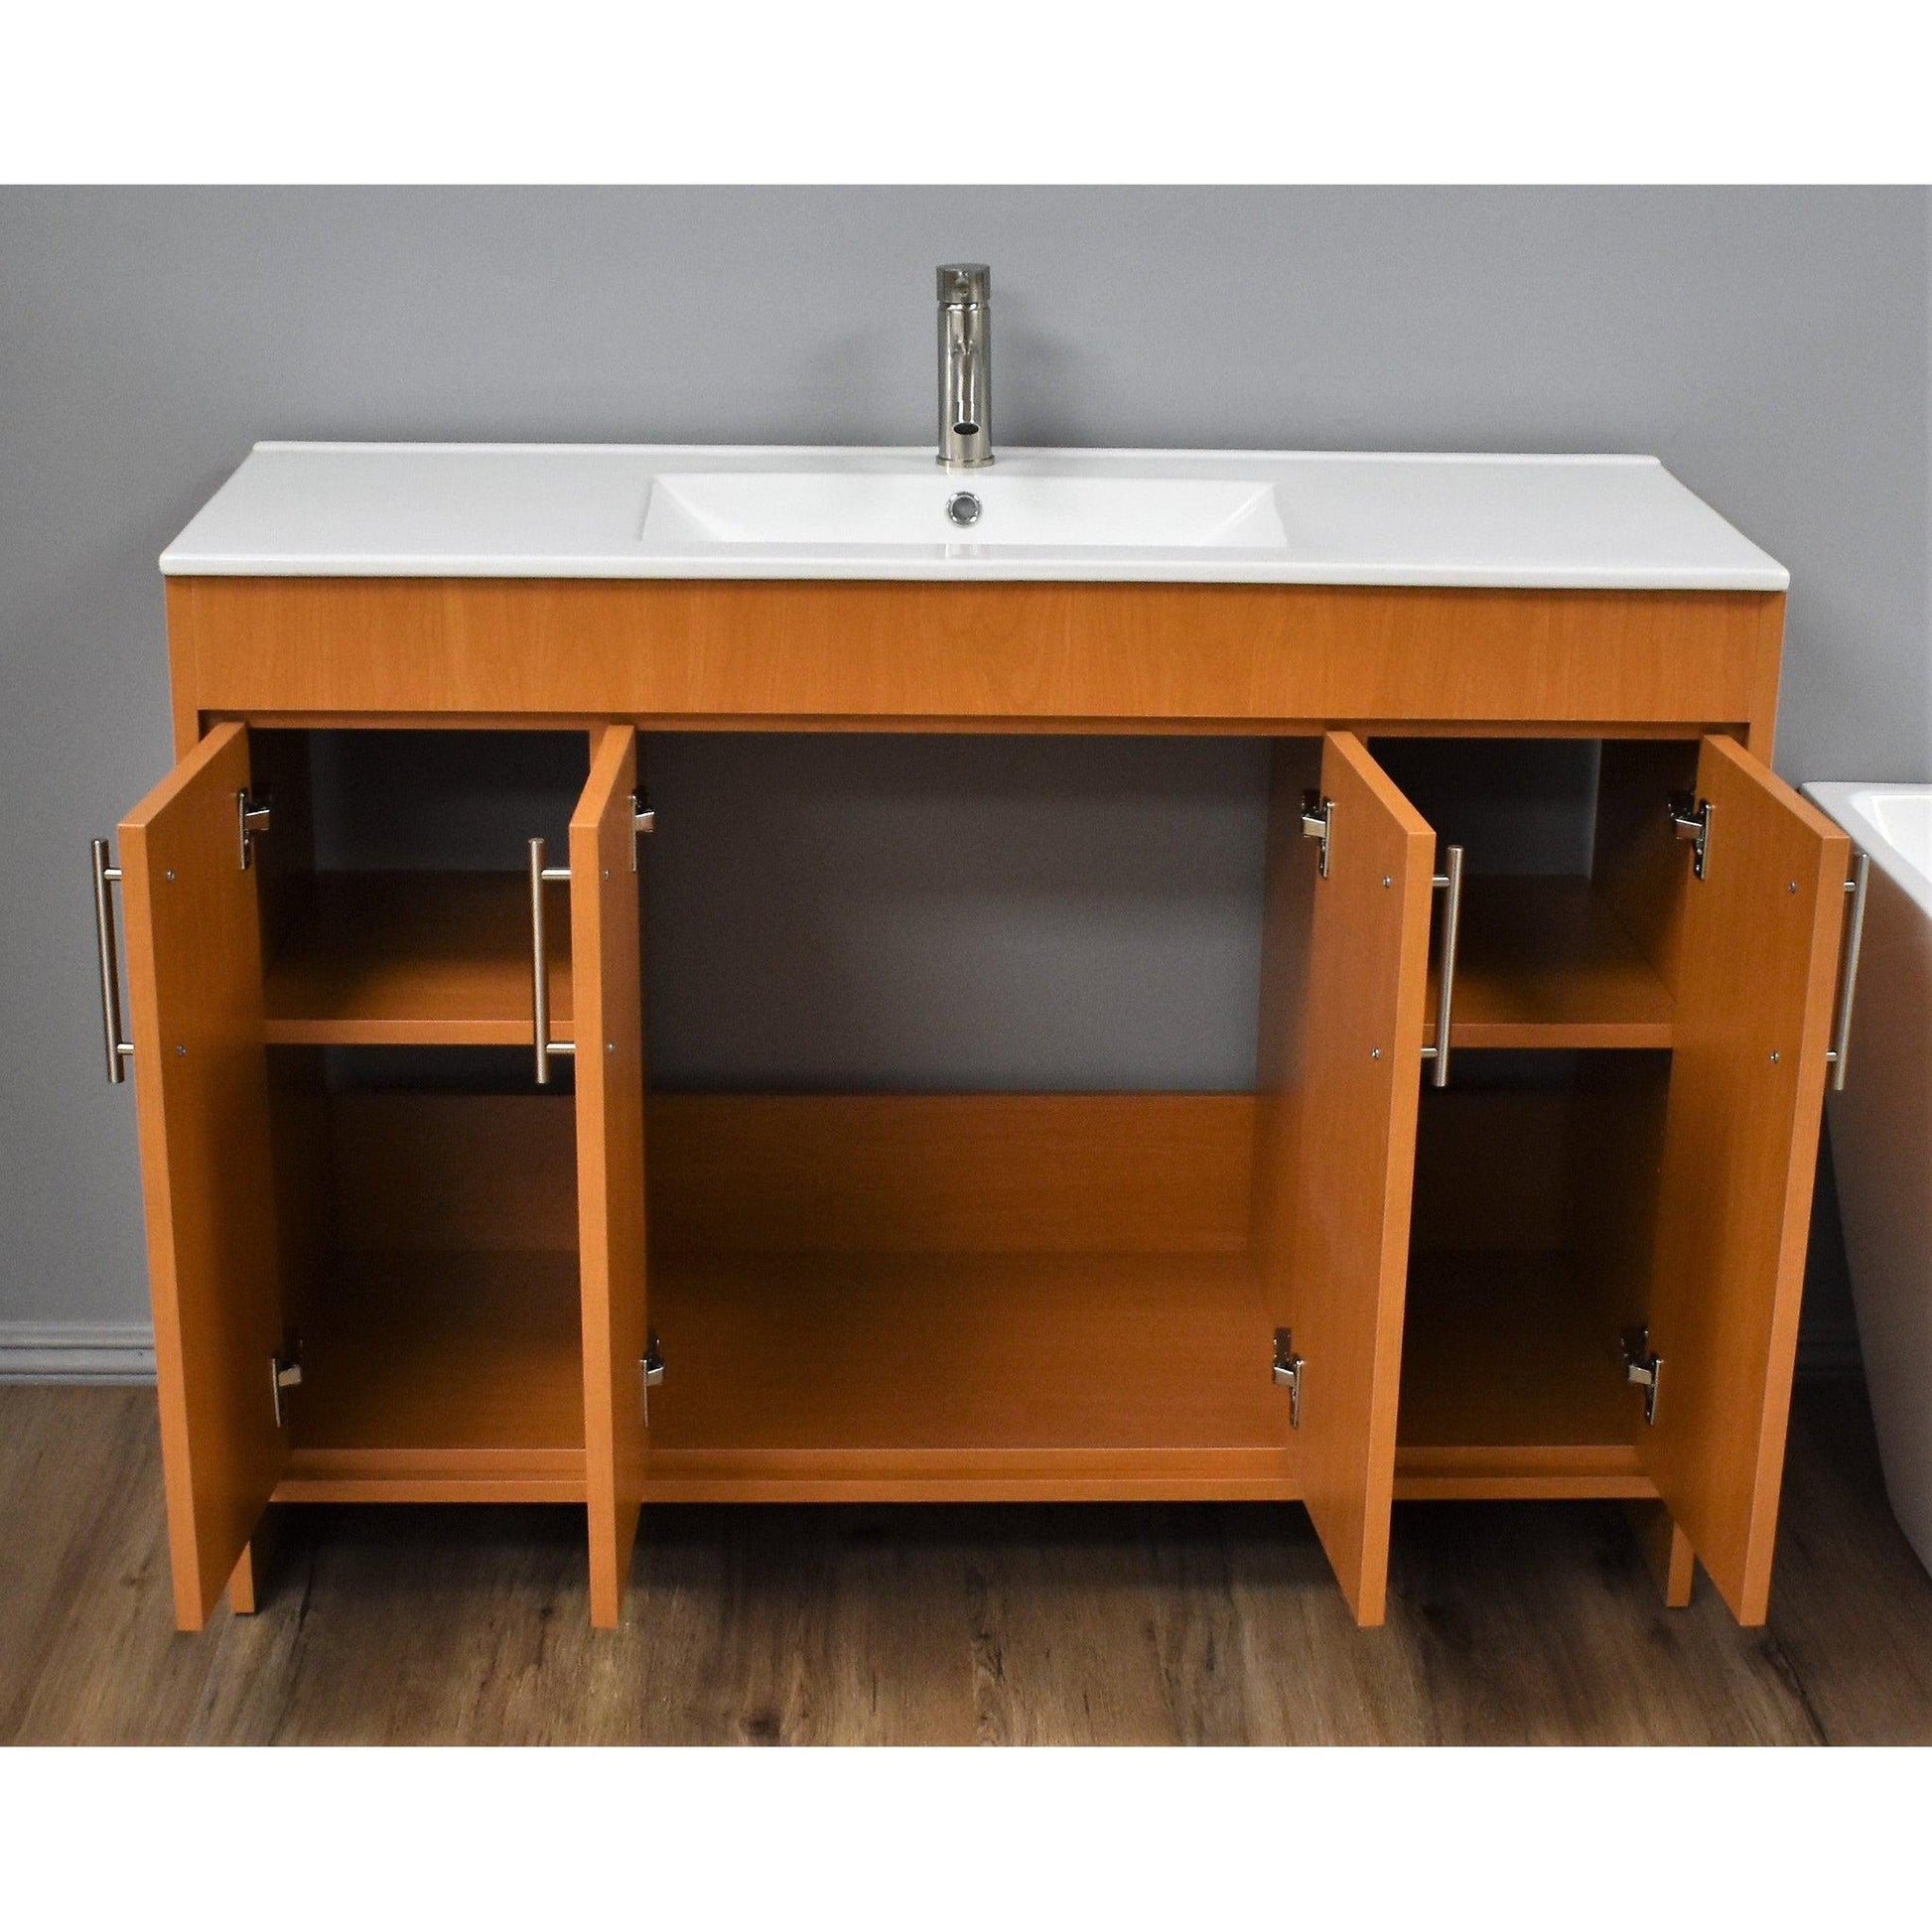 Volpa USA Villa 48" Honey Maple Freestanding Modern Bathroom Vanity With Integrated Ceramic Top and Brushed Nickel Round Handles